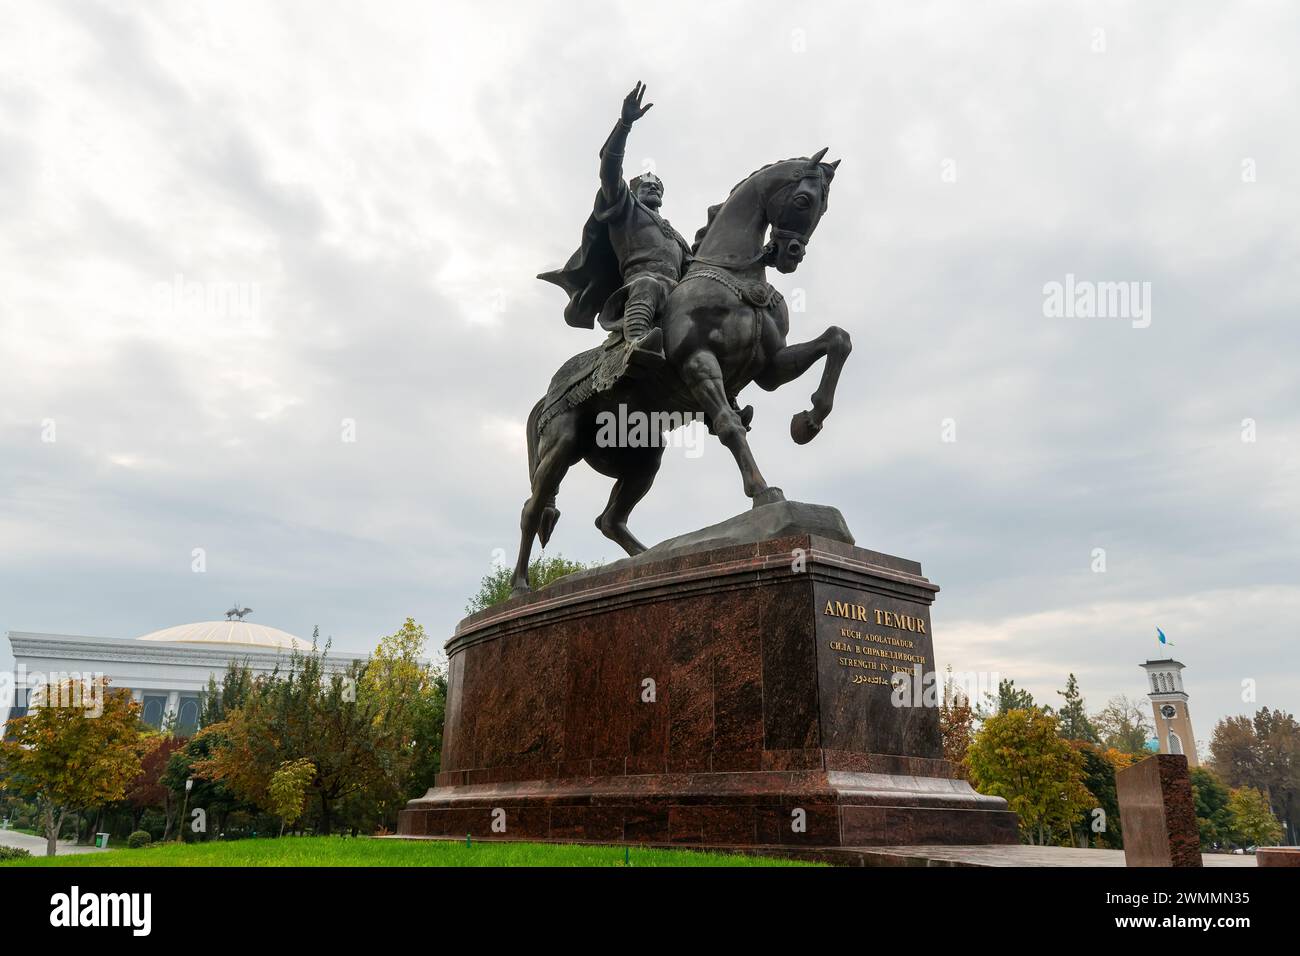 Tashkent, Uzbekistan - October 27, 2023: Monument Amir Timur or Tamerlane on a sunny day with cloudy sky background. Stock Photo